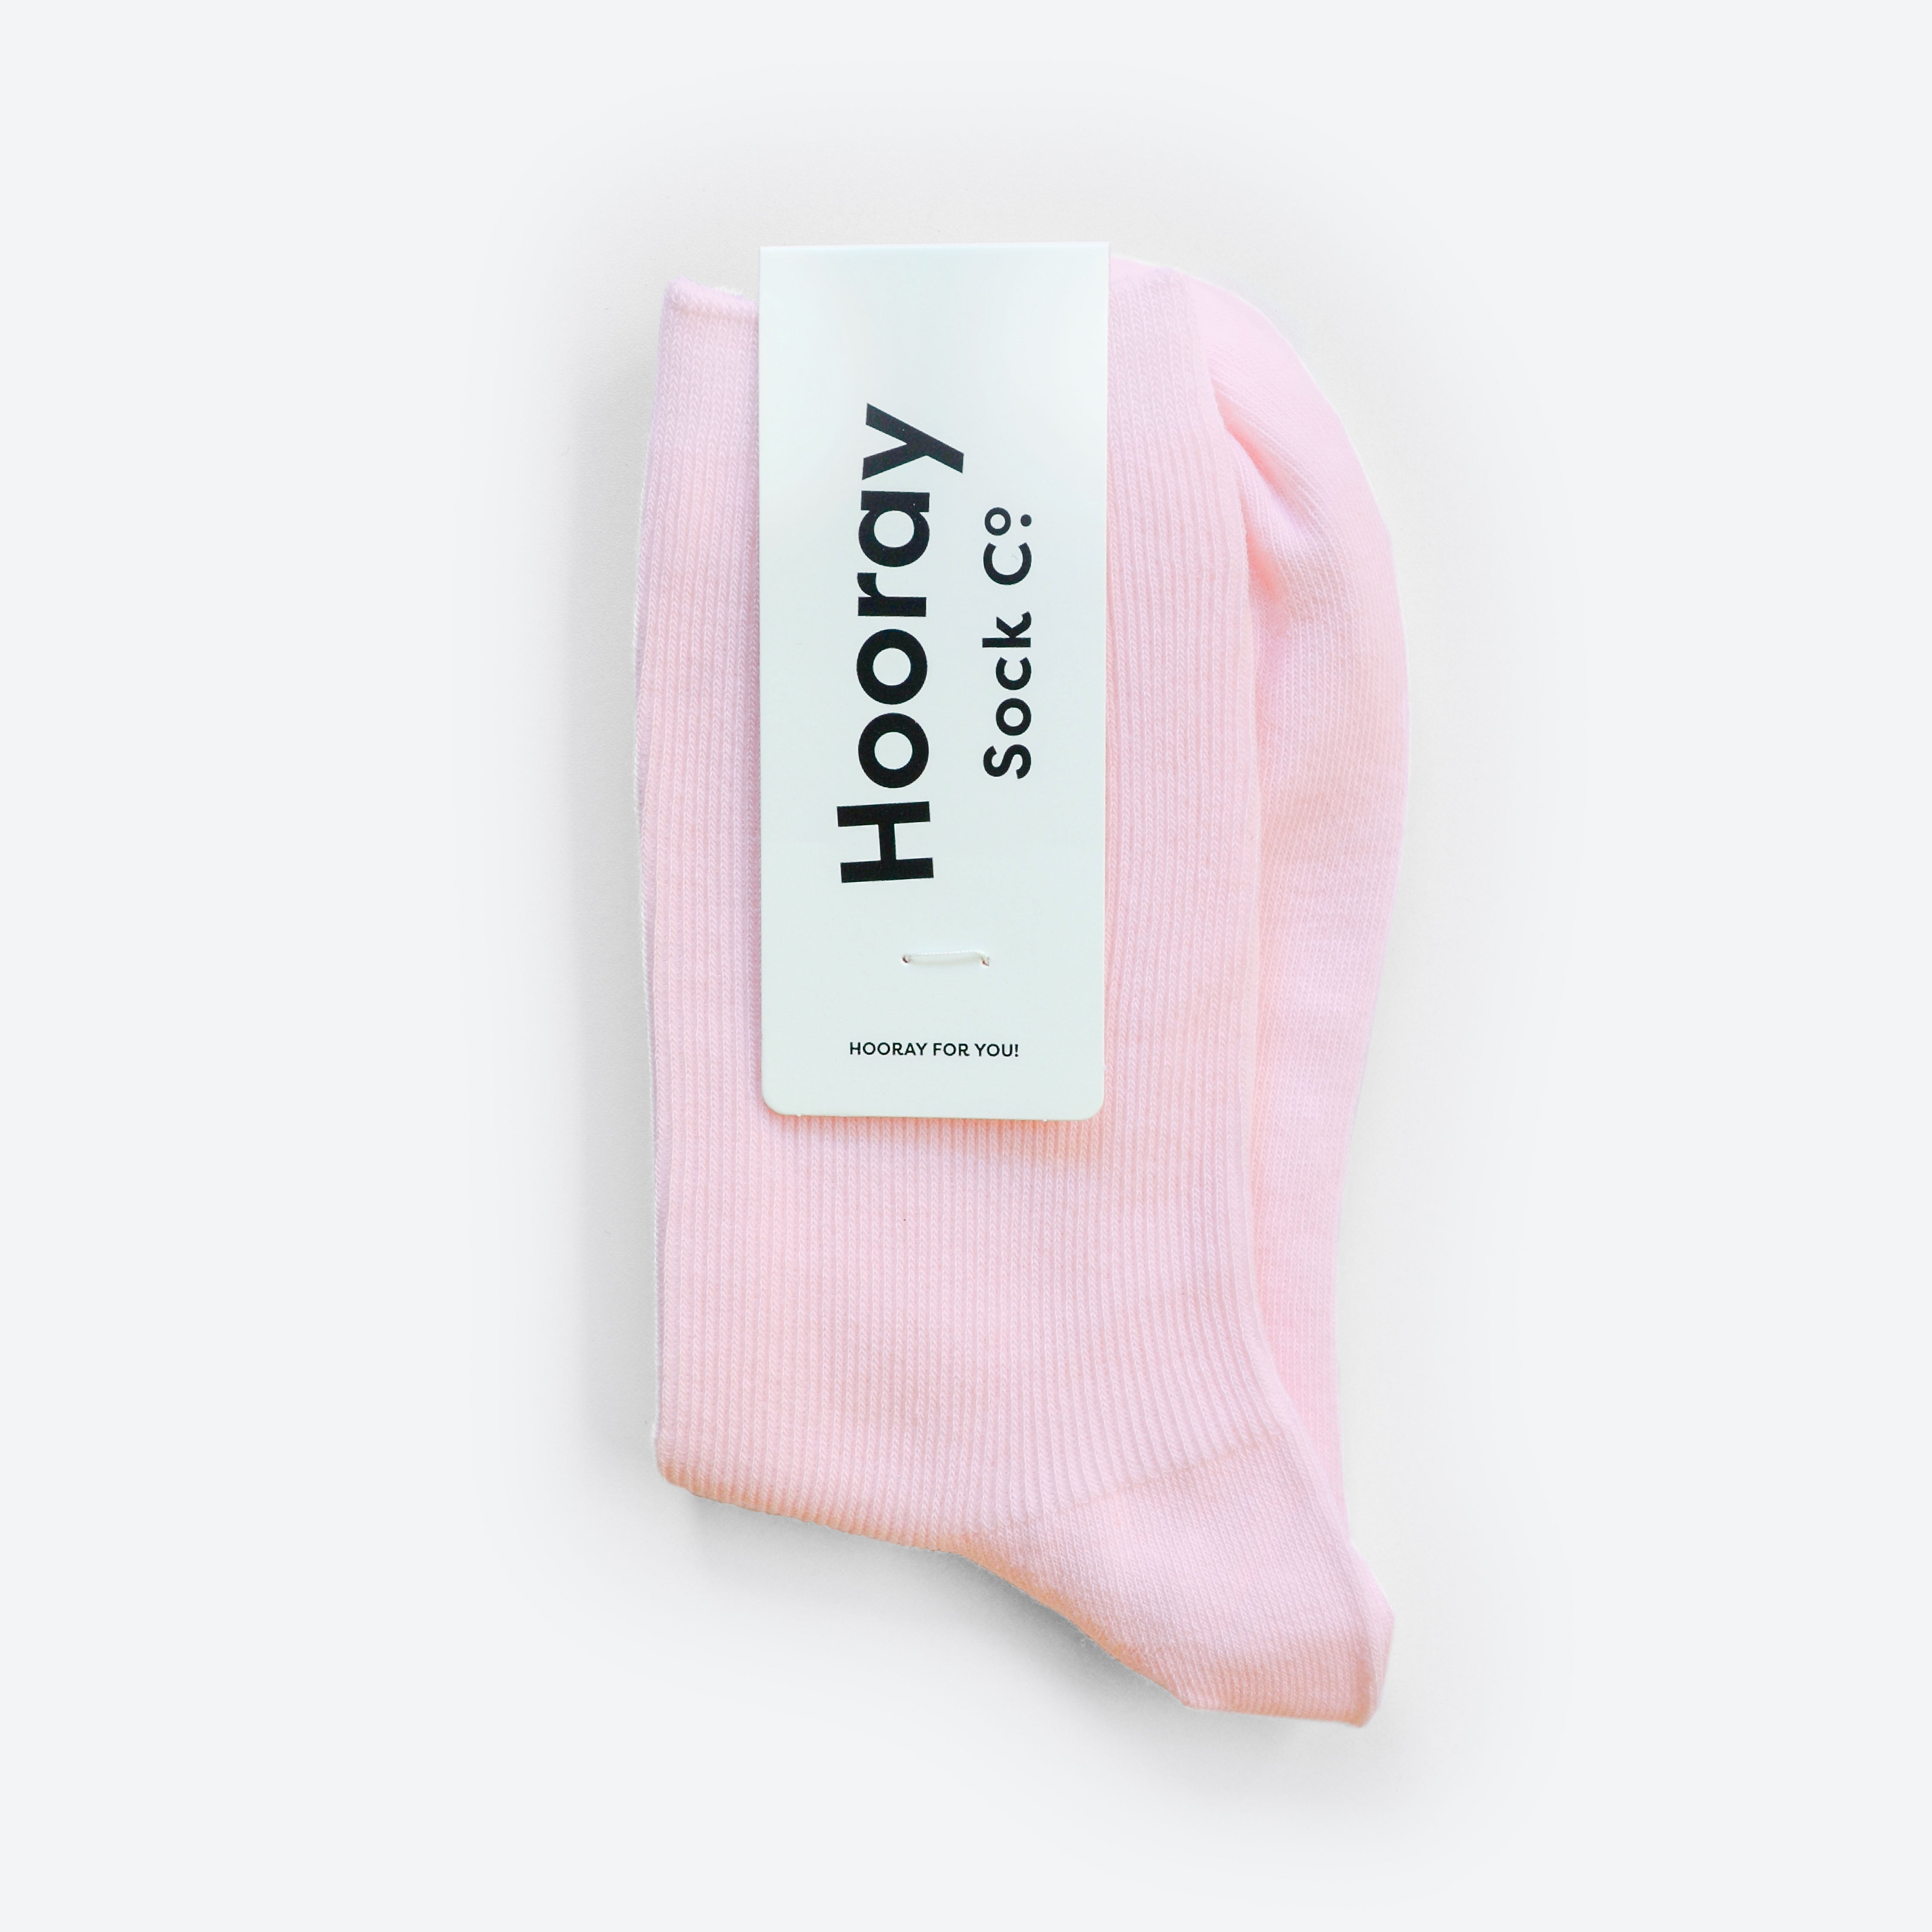 Hooray Sock Co.&#39;s Everyday Pink Cotton Socks: Comfy, colorful, and unisex. 80% cotton, 20% spandex. Machine washable. Made in South Korea. Fits US women&#39;s shoe sizes 4-10.